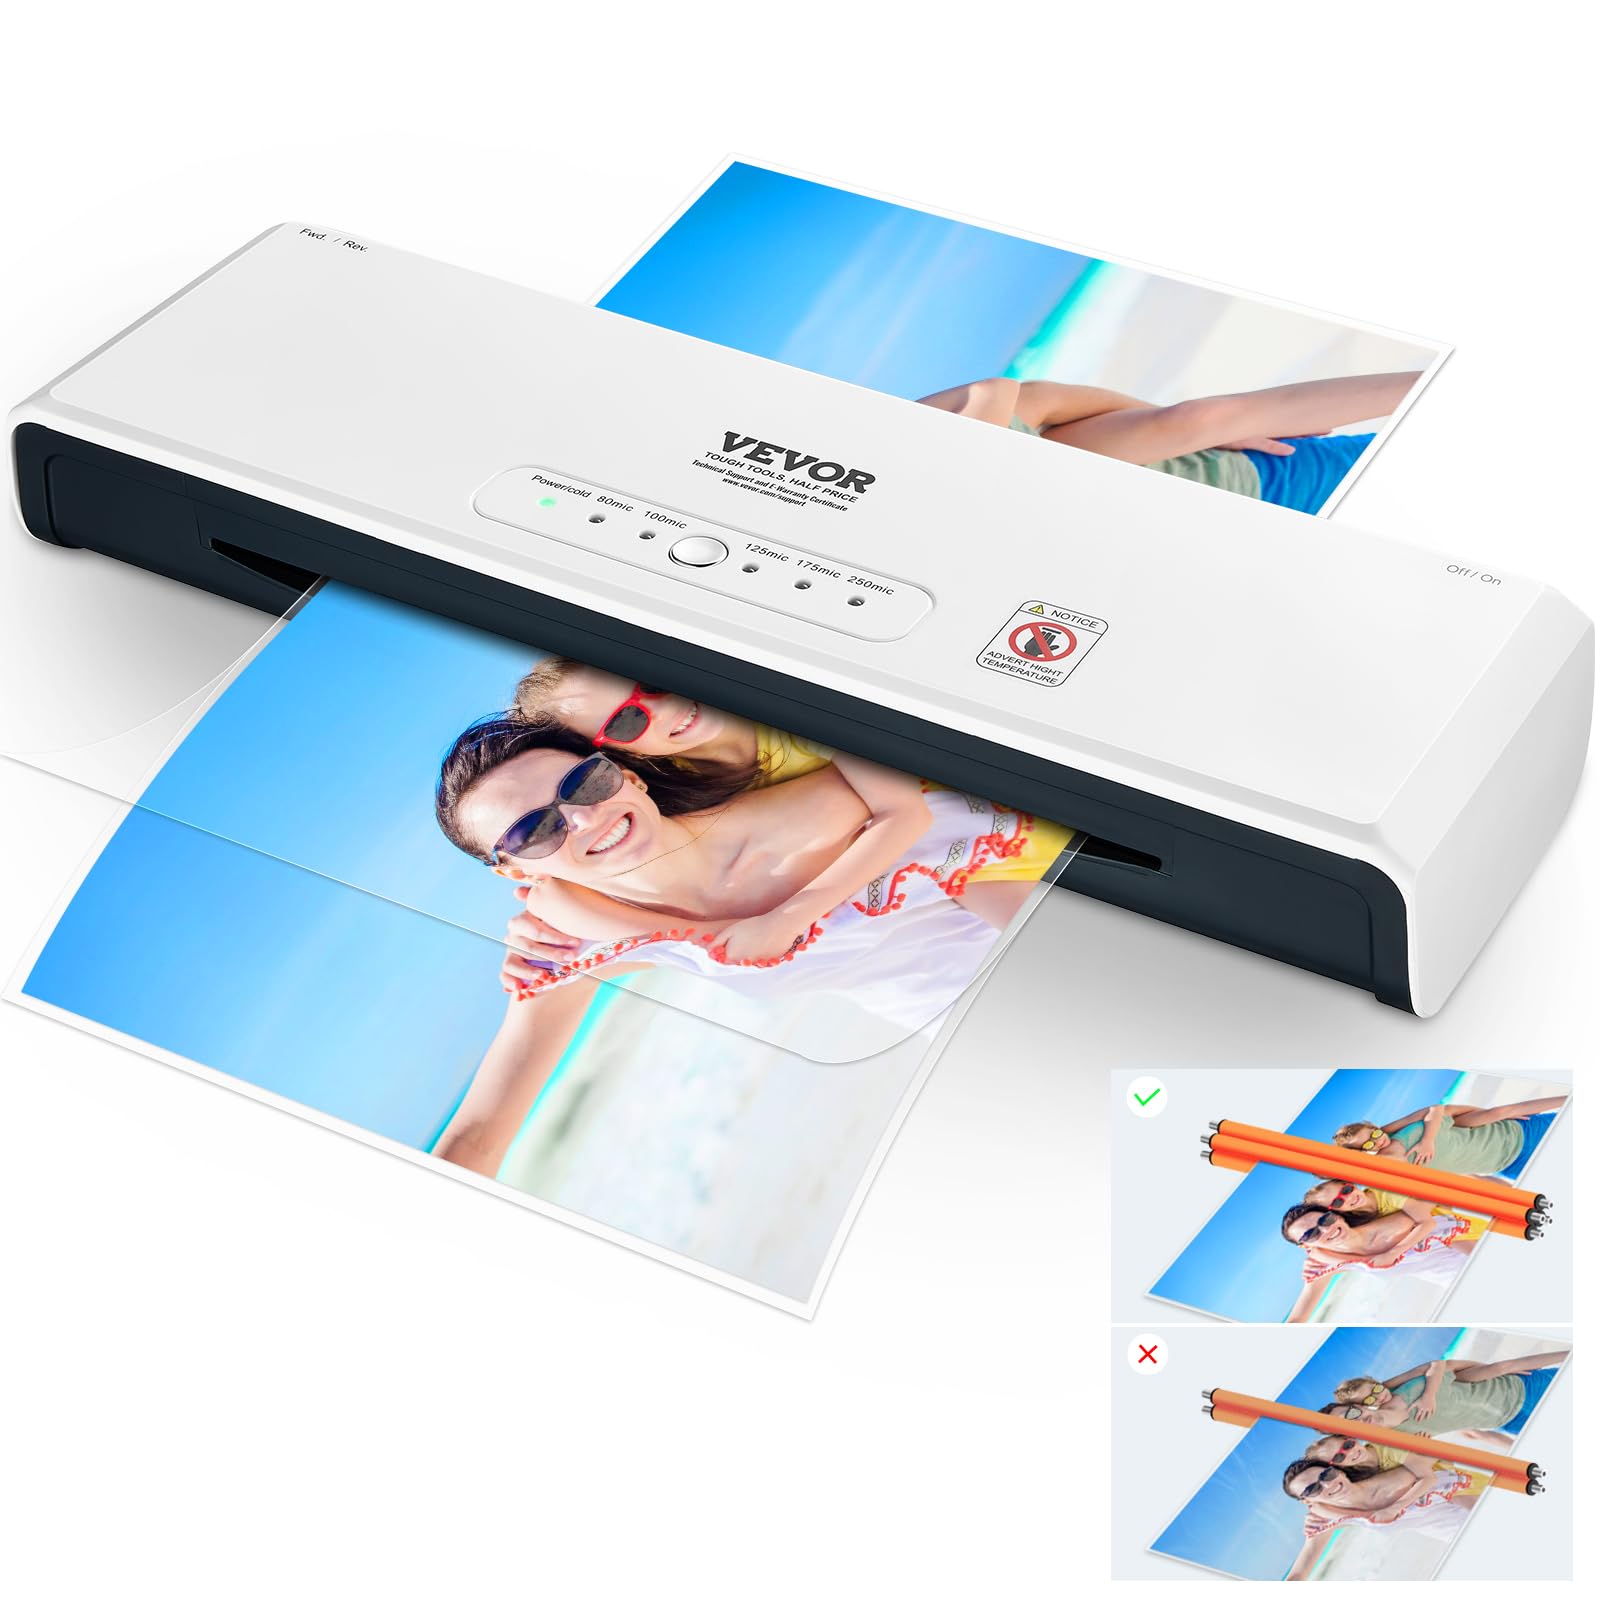 VEVOR Laminator, 13-inch Laminating Machine, 4 Rollers Hot and Cold Thermal Laminator, Quick Warm-up, Fast Laminating Machine with 3 mil Lamination Films for Home, Office, School